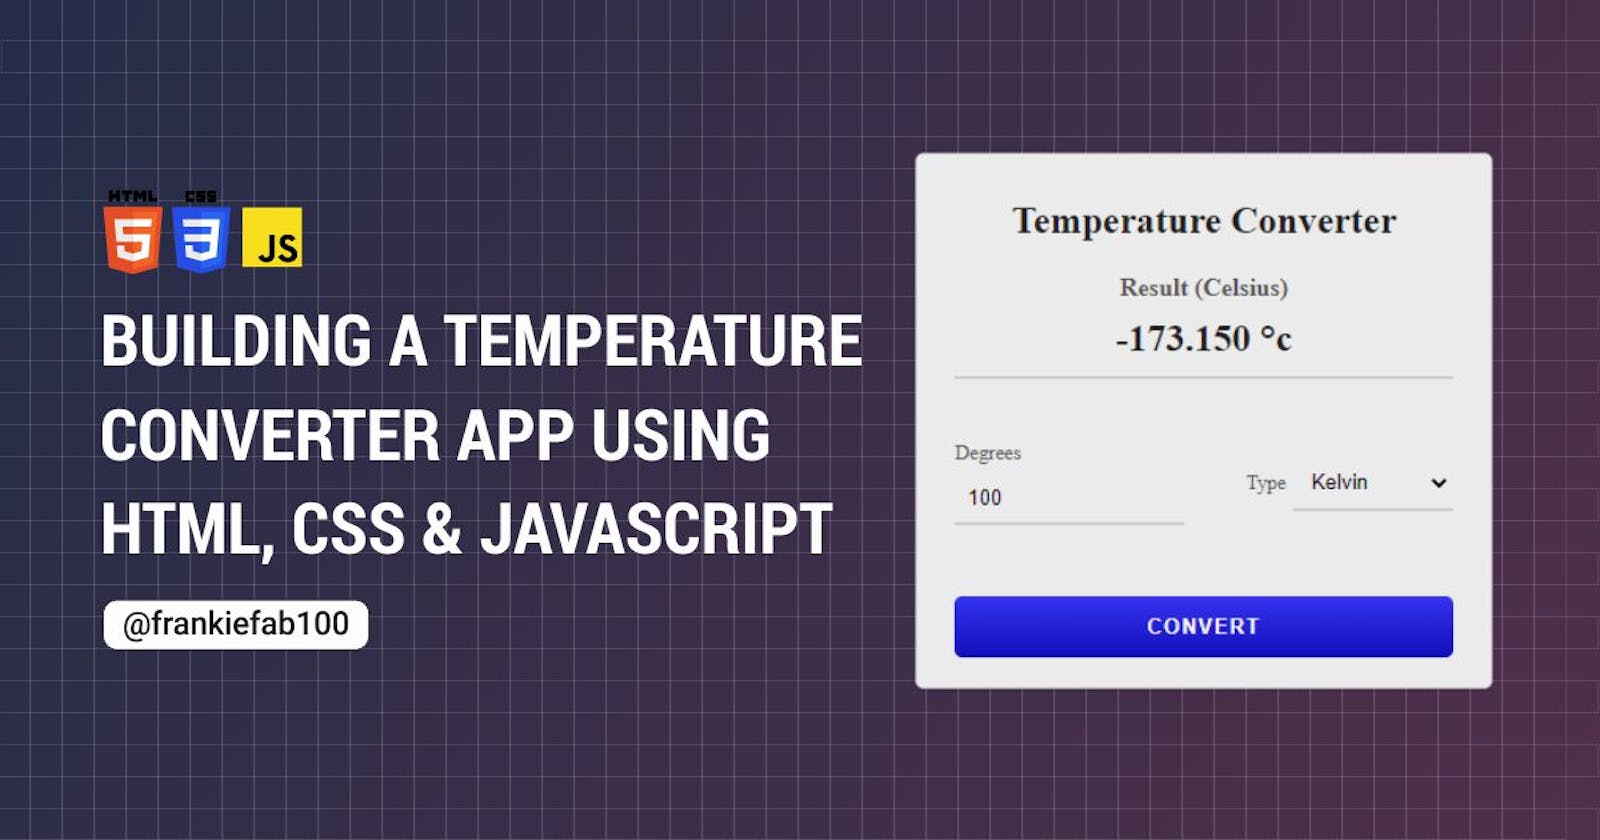 Building a Temperature Converter App using HTML, CSS, and JavaScript